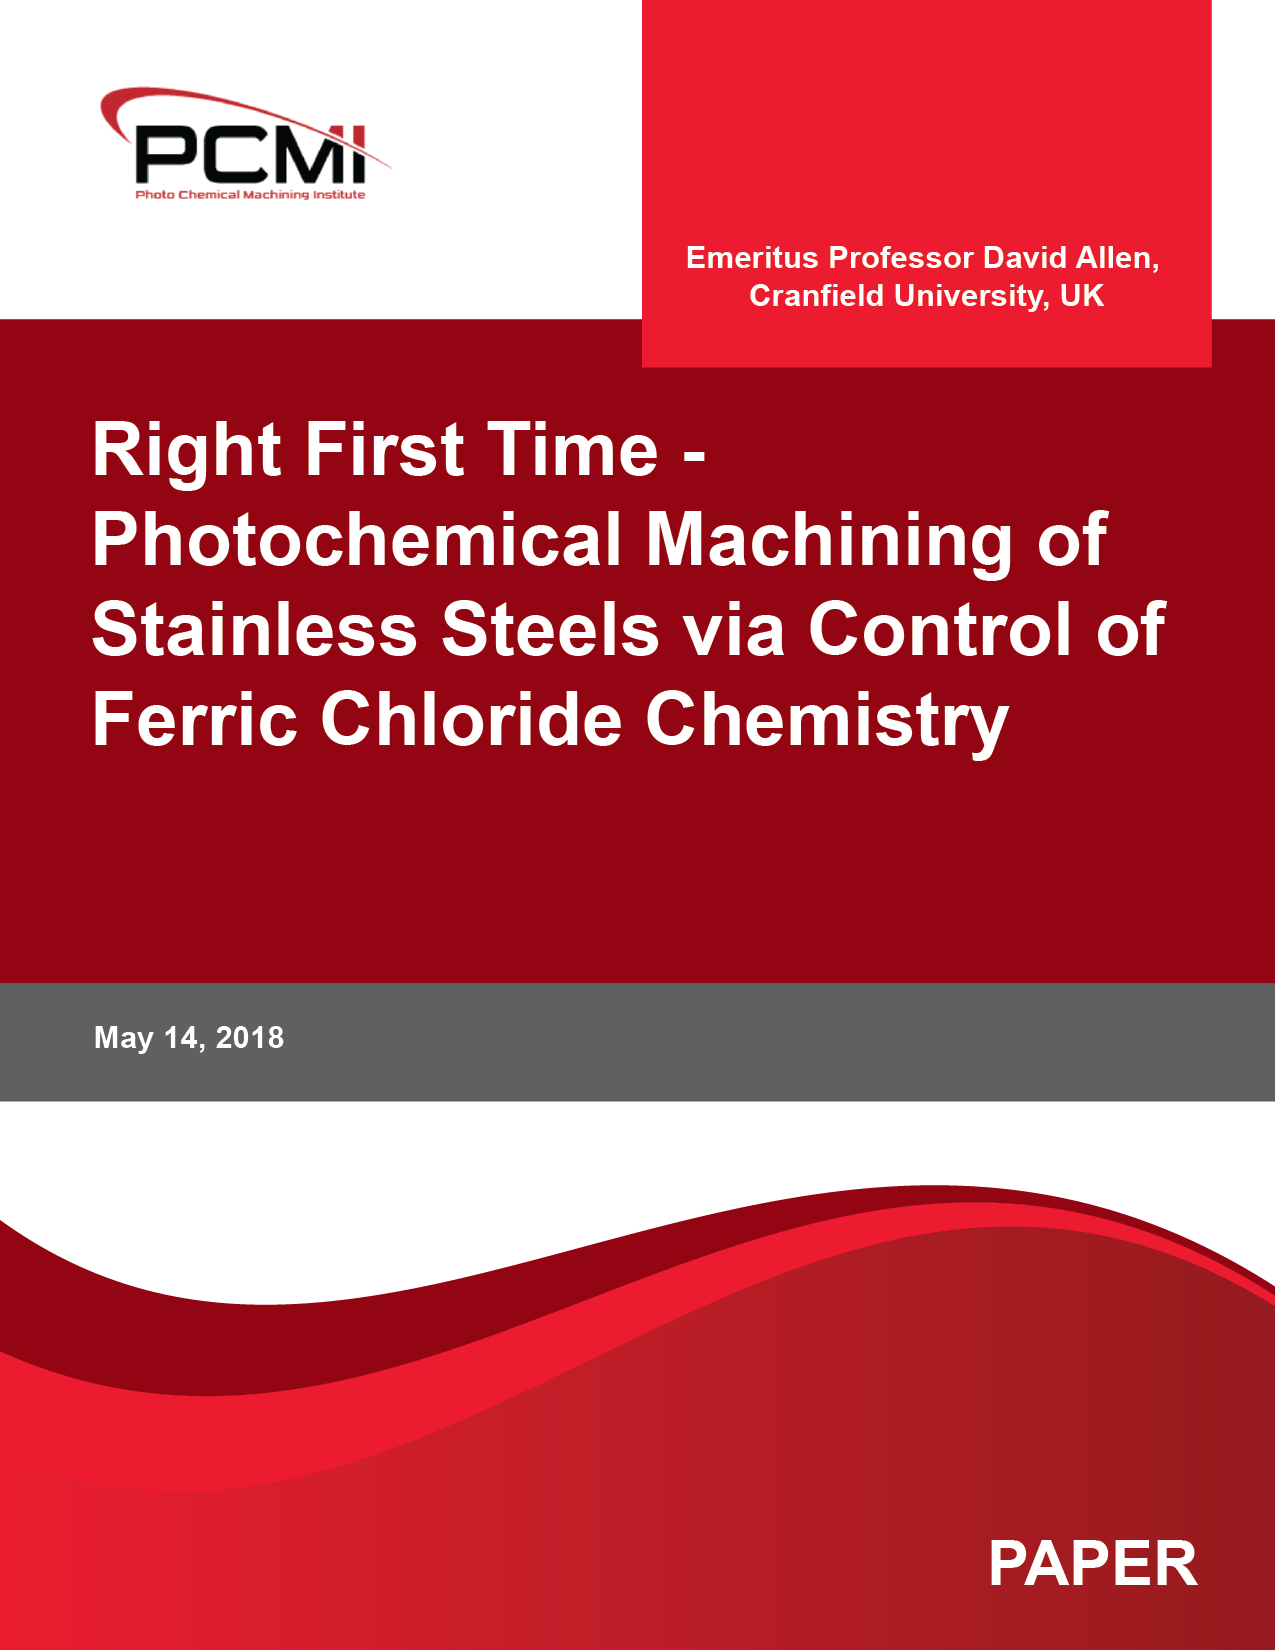 Right First Time – Photochemical Machining of Stainless Steels via Control of Ferric Chloride Chemistry